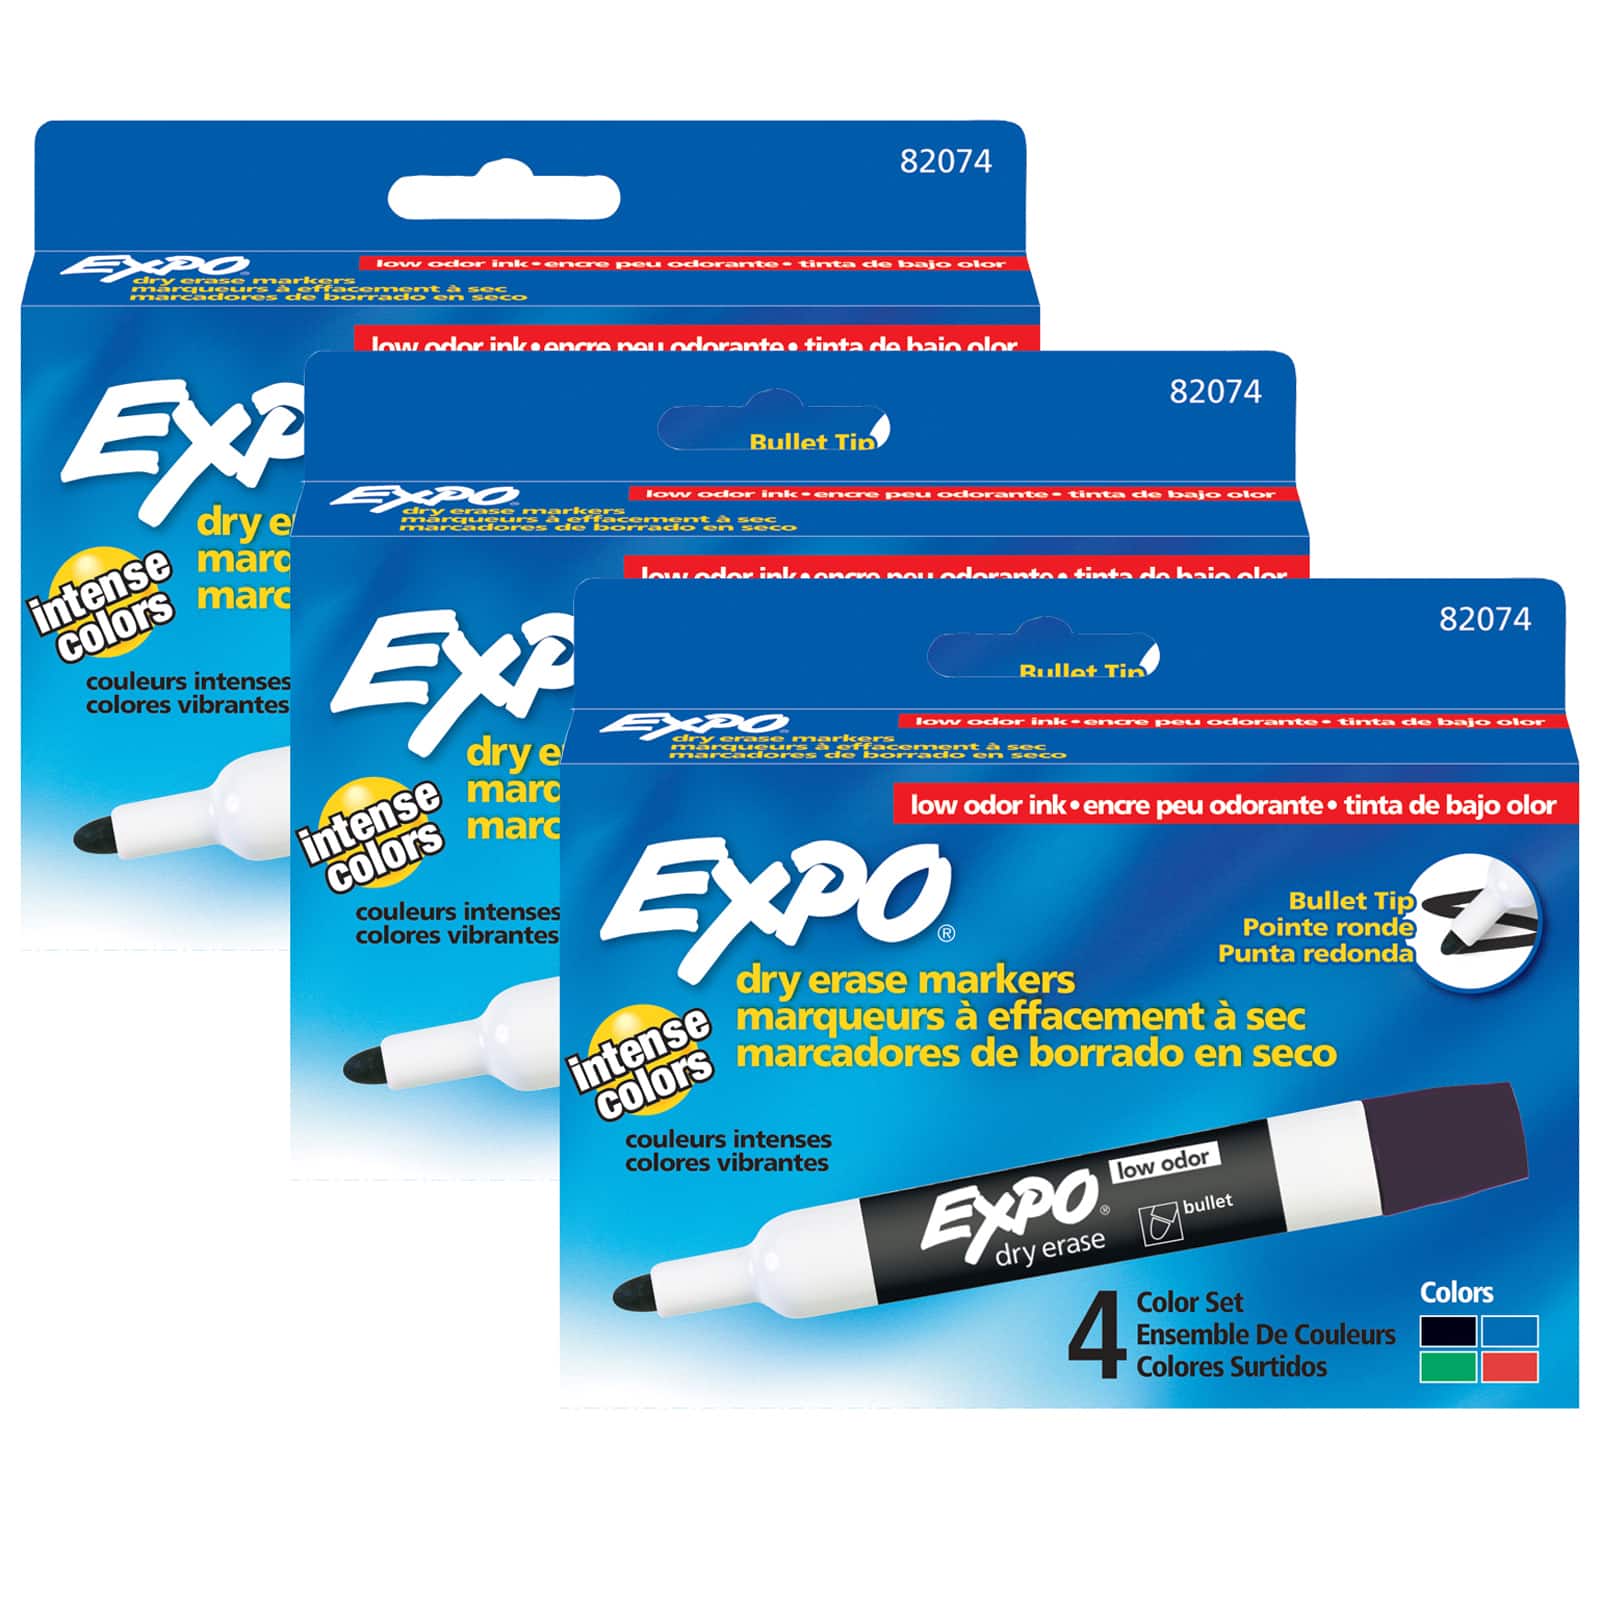 Expo Dry Erase Markers, Black - 12 dry erase markers